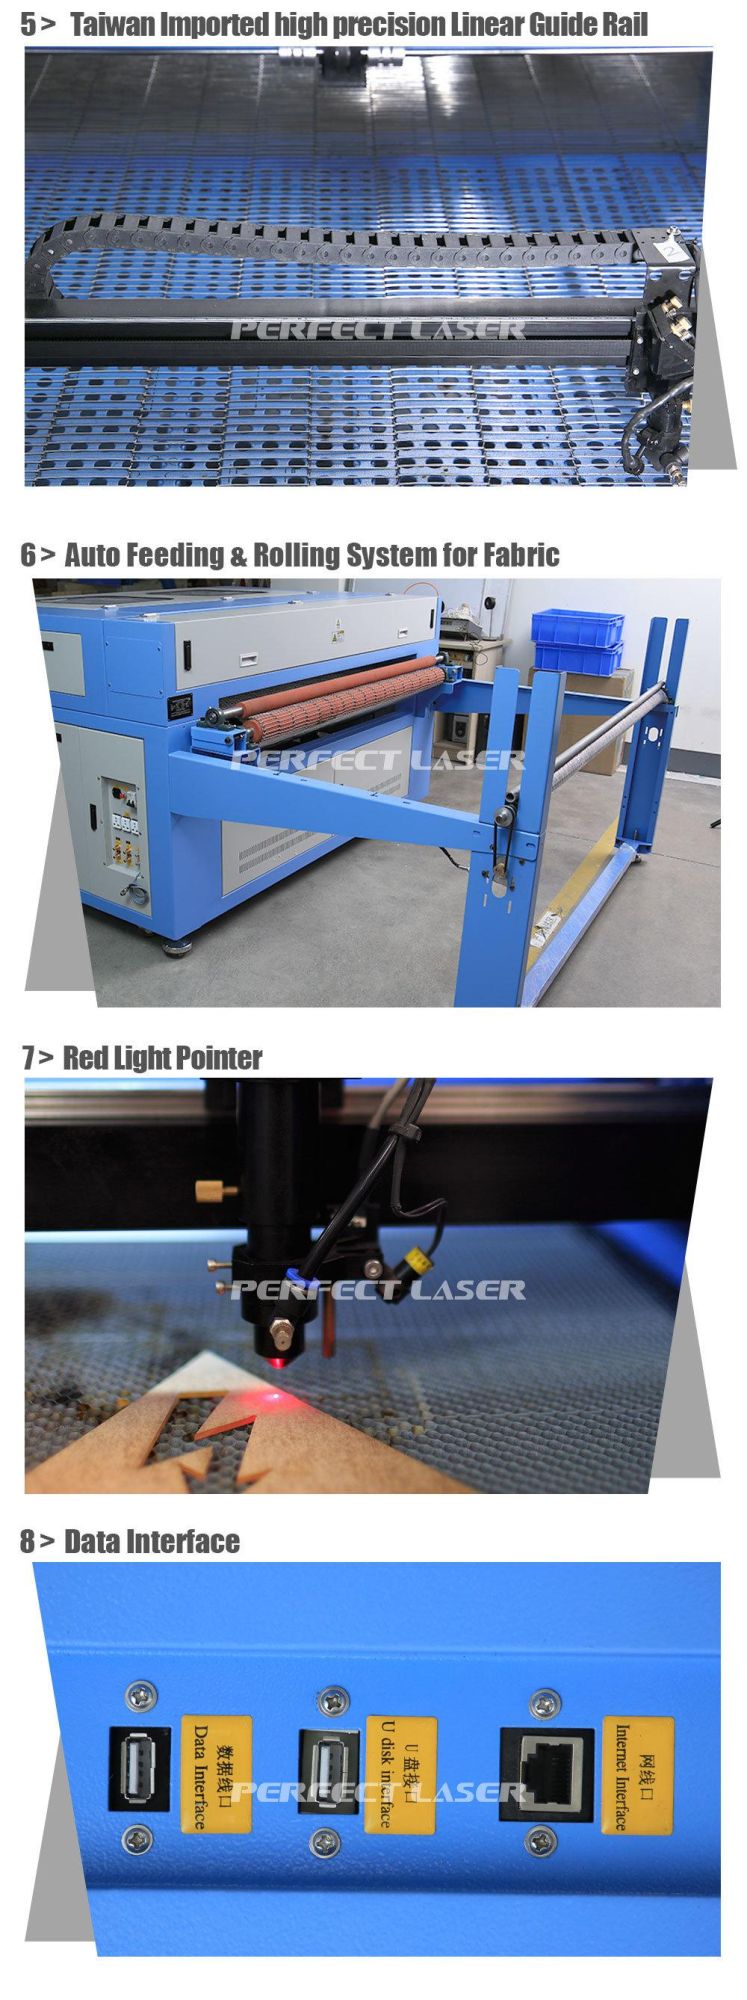 CO2 Laser Engraving and Cutting Machine for Wood